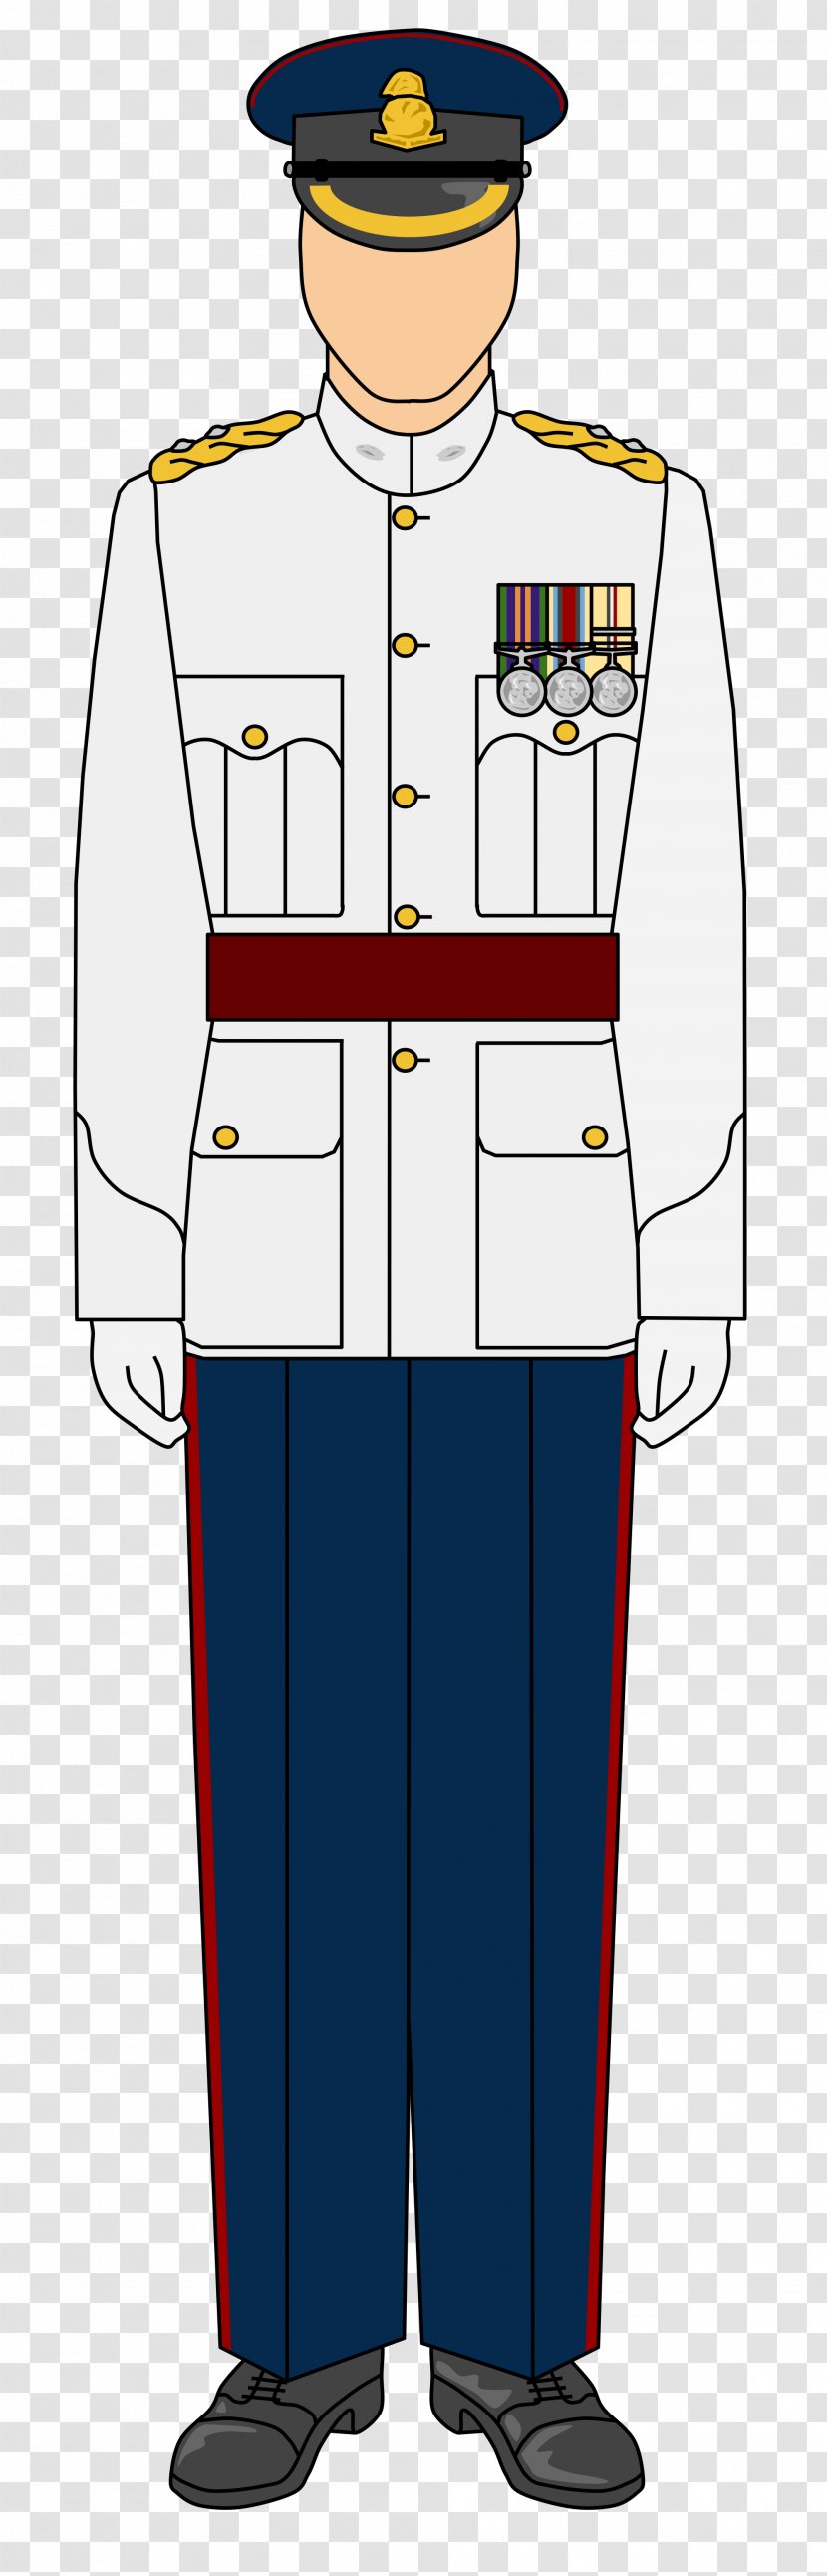 Uniforms Of The British Army Mess Dress Uniform Full Service - Ceremonial Transparent PNG